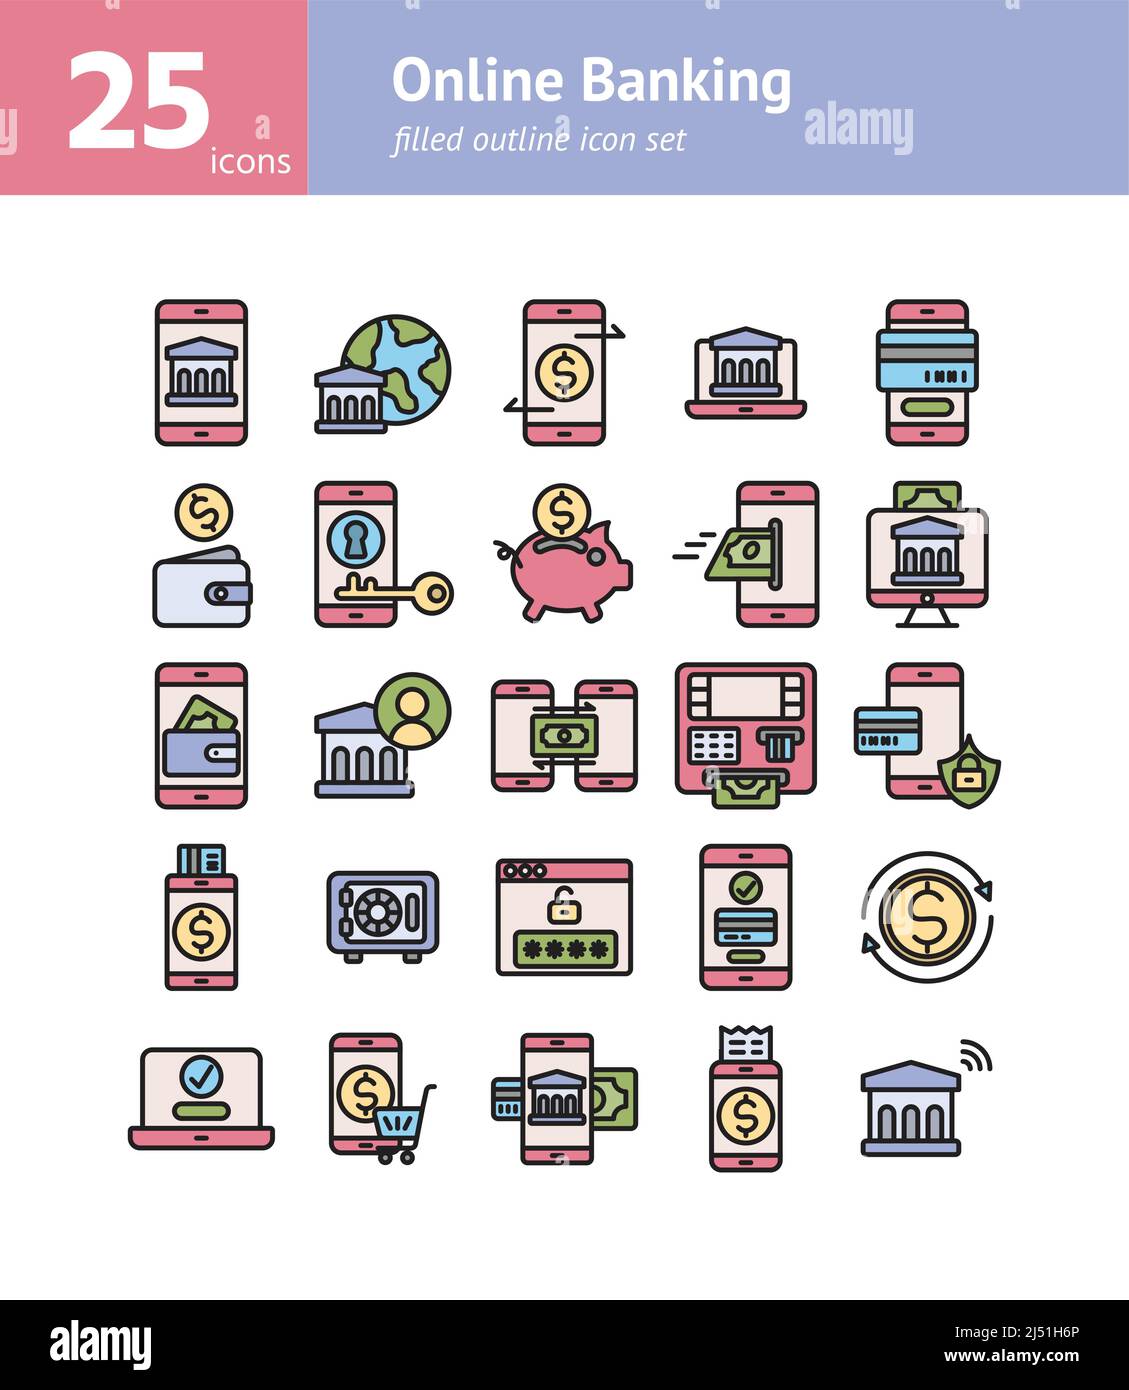 Online Banking filled outline icon set. Vector and Illustration. Stock Vector